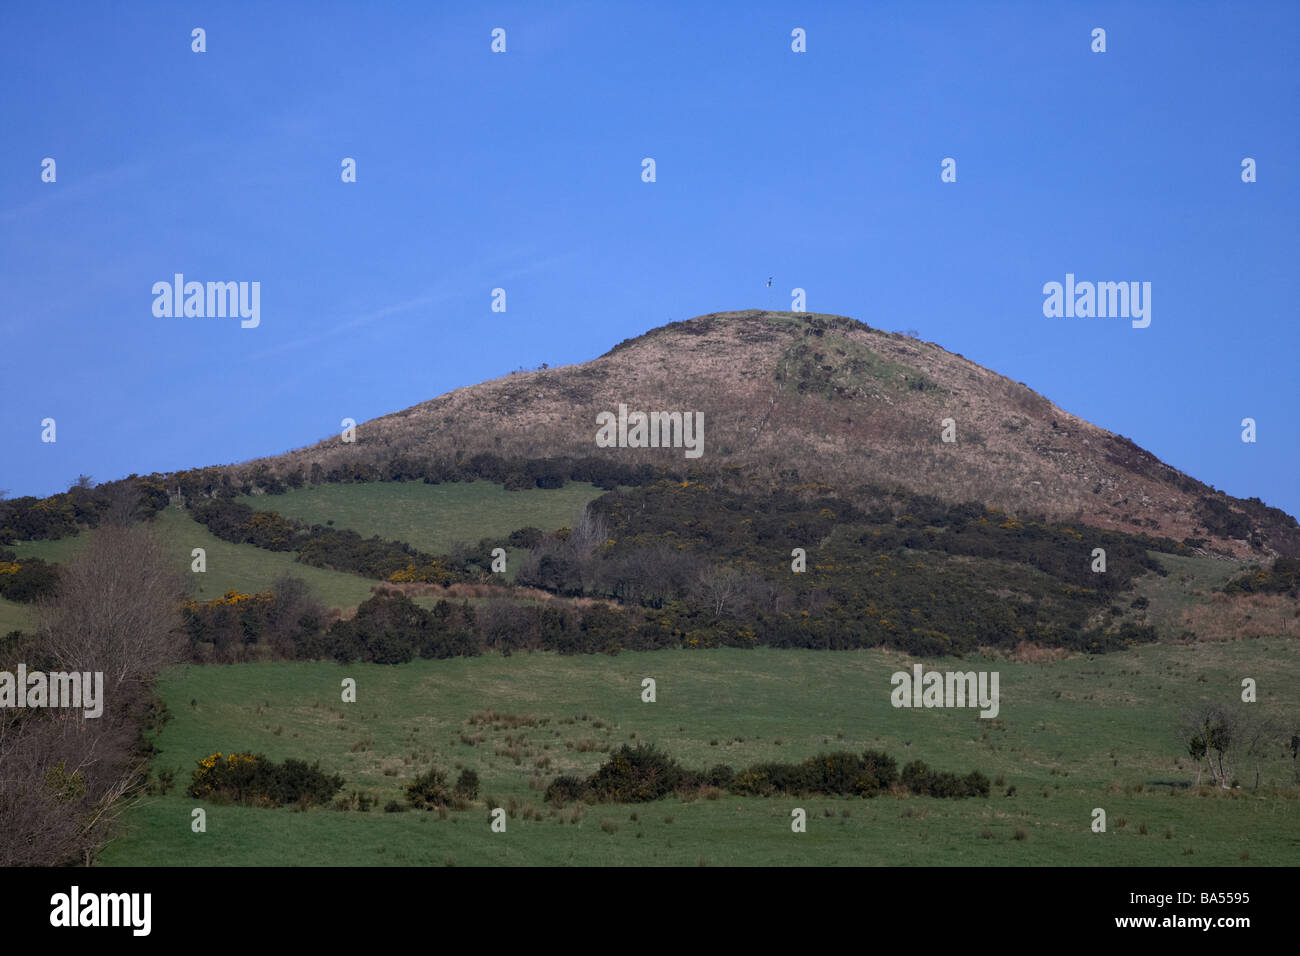 sugarloaf hill in Sturgan Brae in south armagh county armagh northern ireland uk Stock Photo